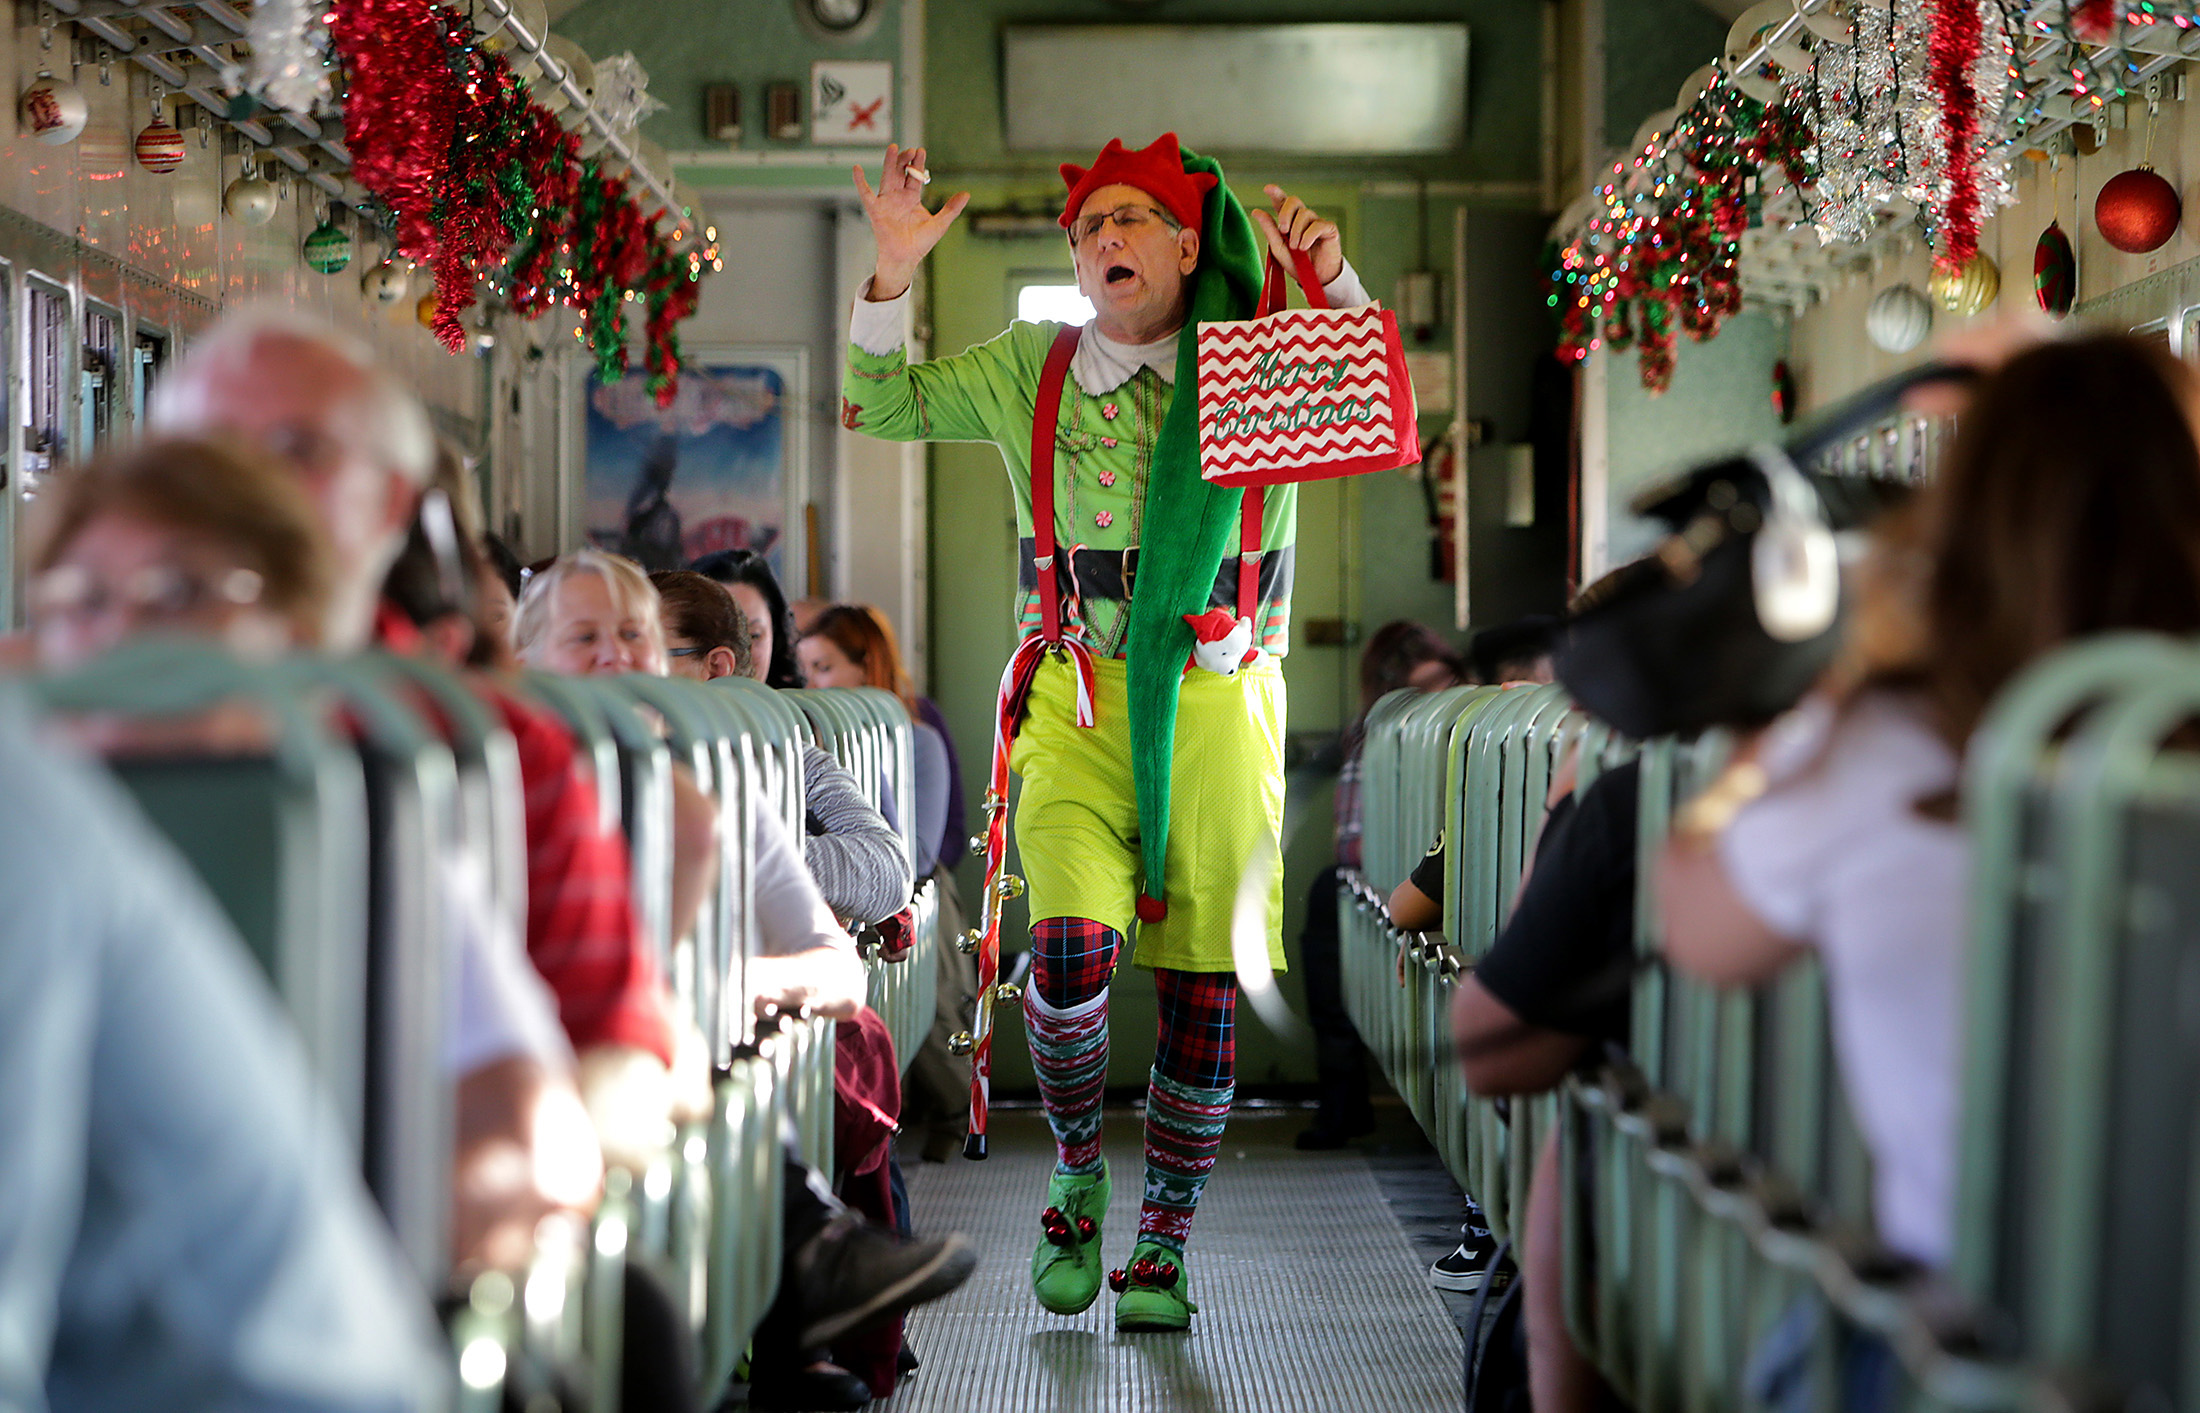  Ken Schwartz plays Jingles the elf as he sings and dances for guests on the train during "Take a Train to Santa’s Workshop" at Orange Empire Railway Museum Sunday in Perris, CA. December 3, 2017. 
 